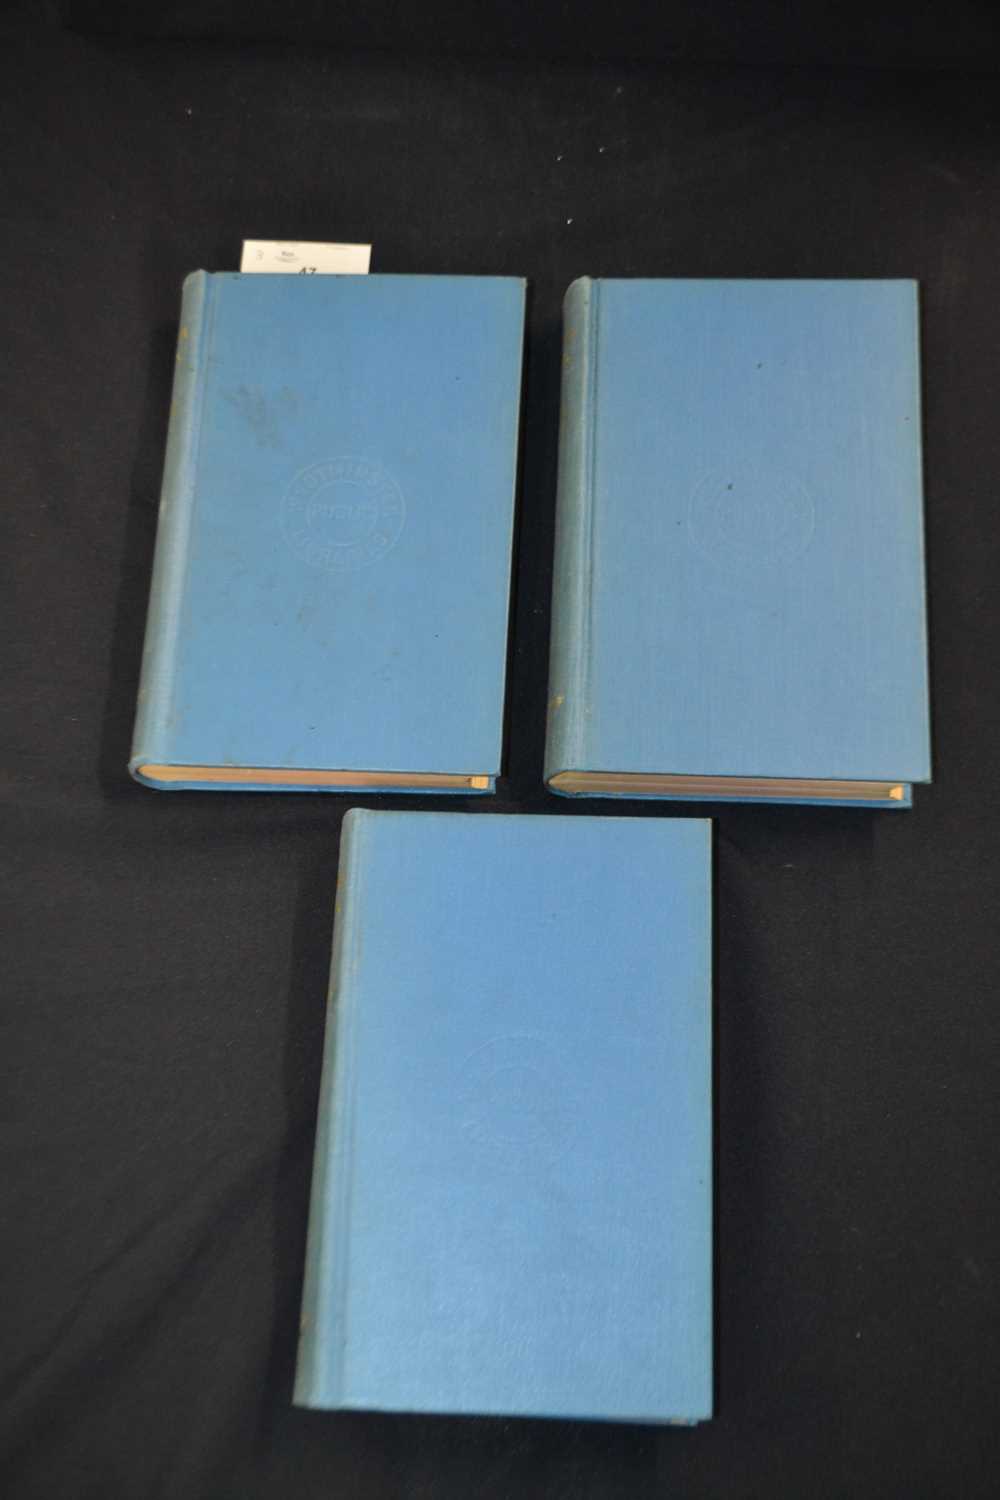 T A BRASSEY (Ed) /VISCOUNT HYTHE (Ed): THE NAVAL ANNUAL: 3 volumes: 1911; 1912; 1913 (3) - Image 2 of 2